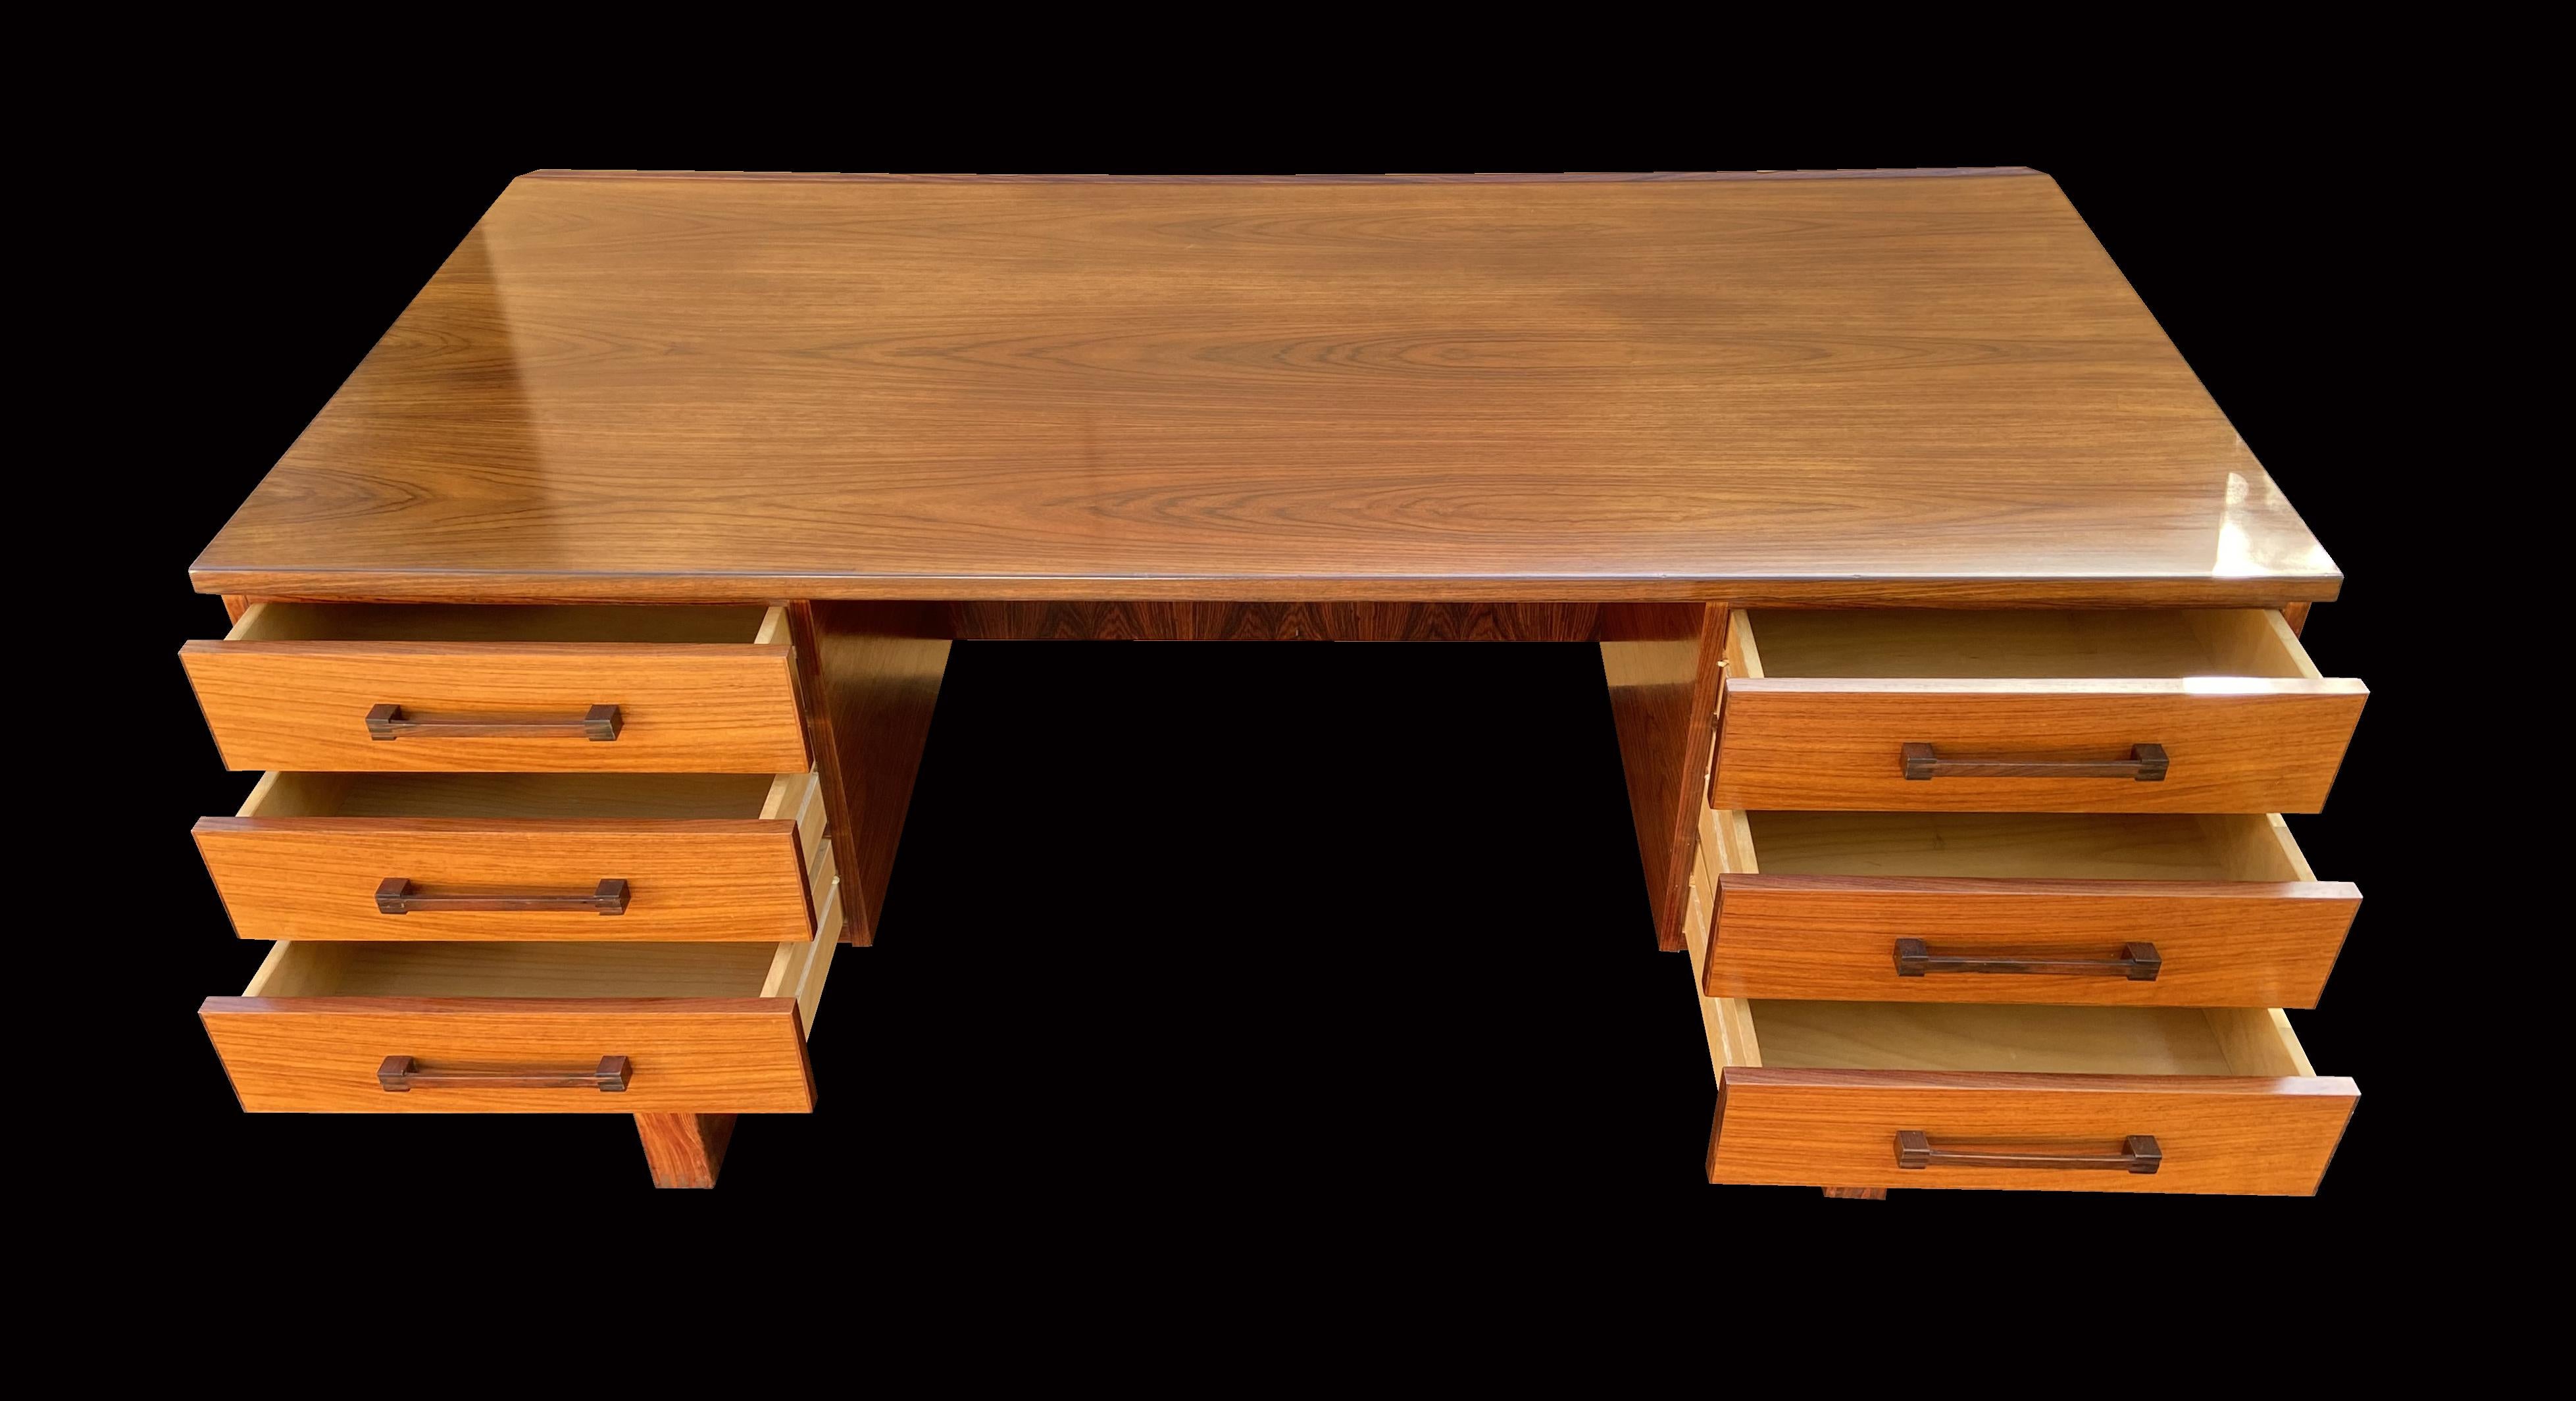 A very nice classic Scandinavian Modern Santos rosewood desk by Torben Valeur and Henning Jensen
Santos rosewood (Machaerium Scleroxylon) is not on the Cites list, so there is no problem with import or export.